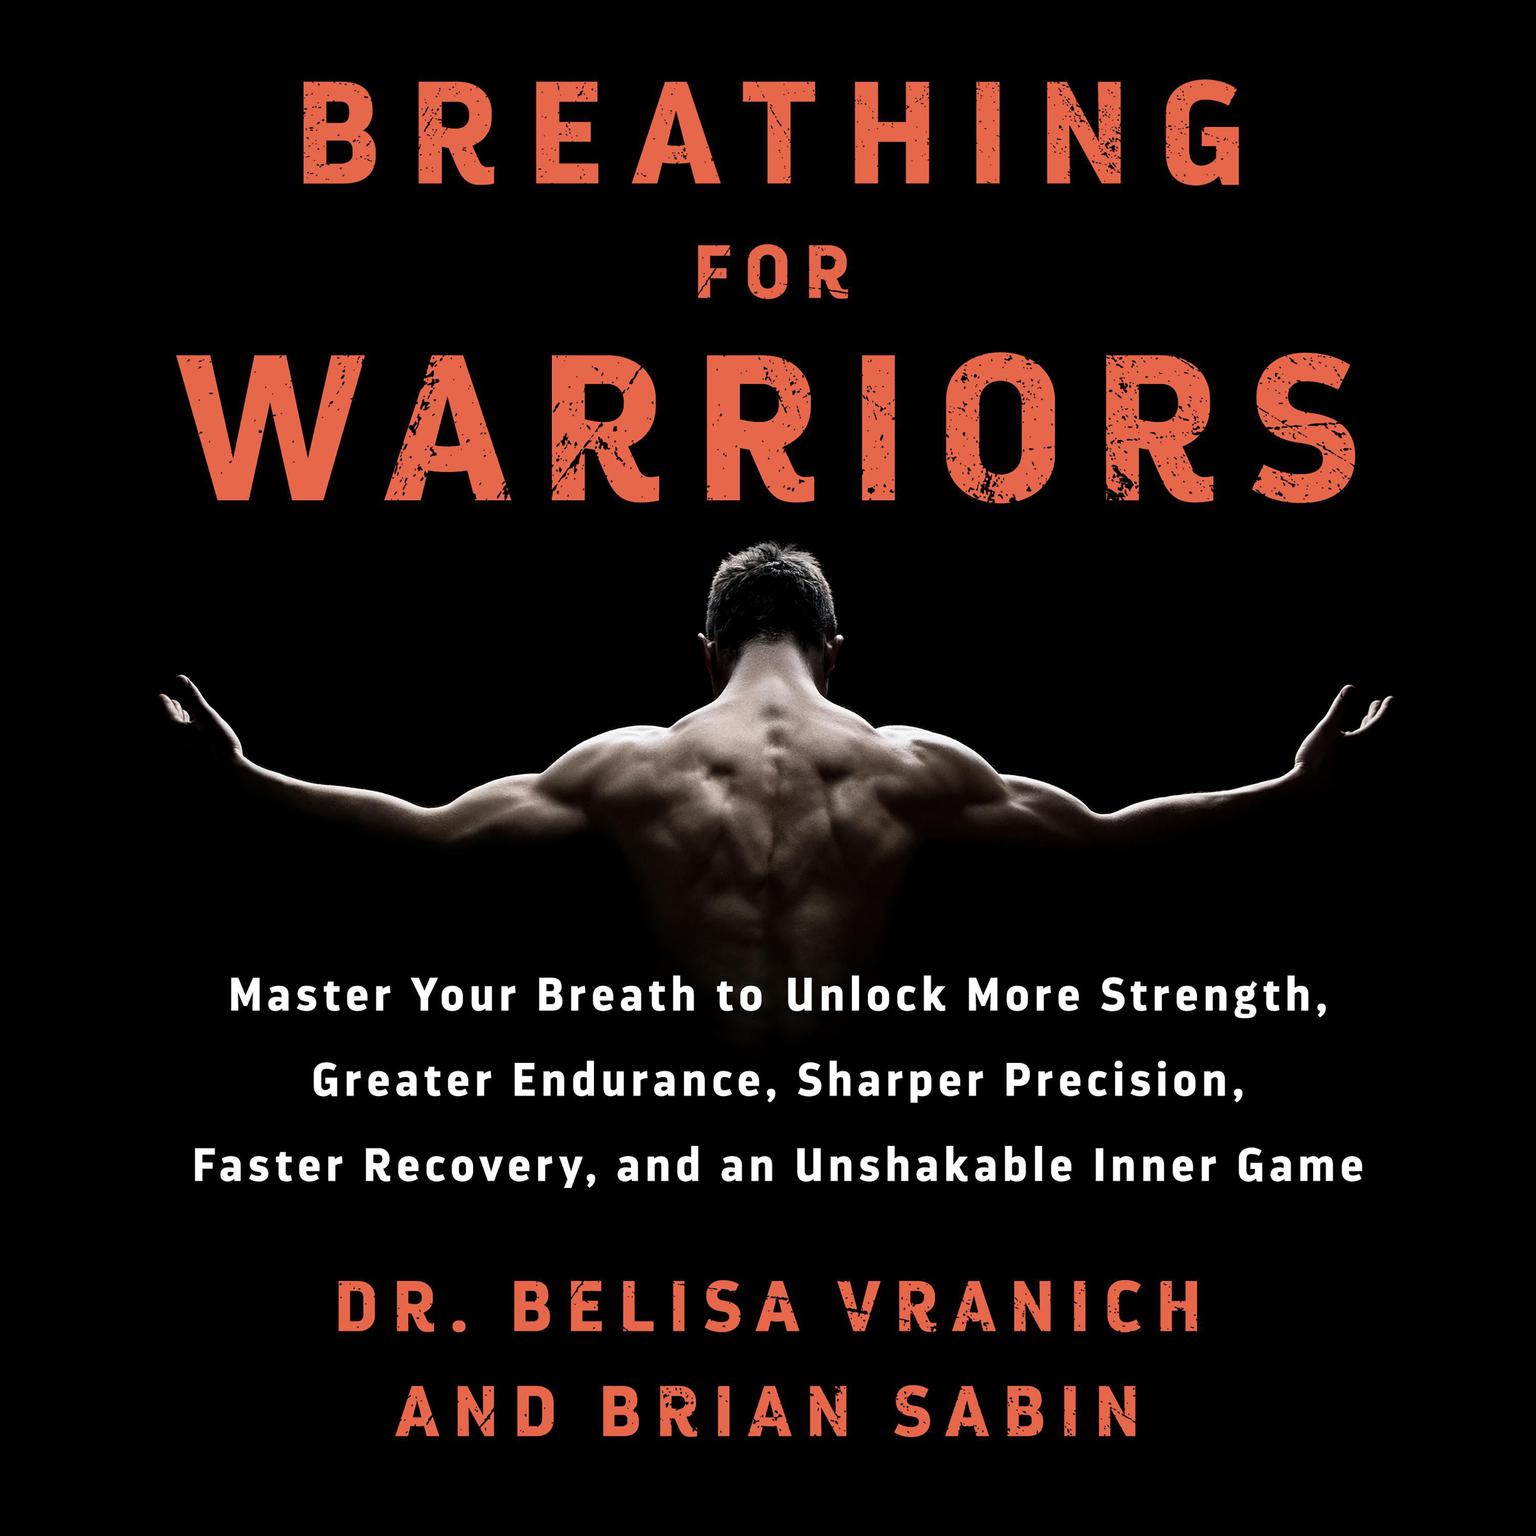 Breathing for Warriors: Master Your Breath to Unlock More Strength, Greater Endurance, Sharper Precision, Faster Recovery, and an Unshakable Inner Game Audiobook, by Belisa Vranich